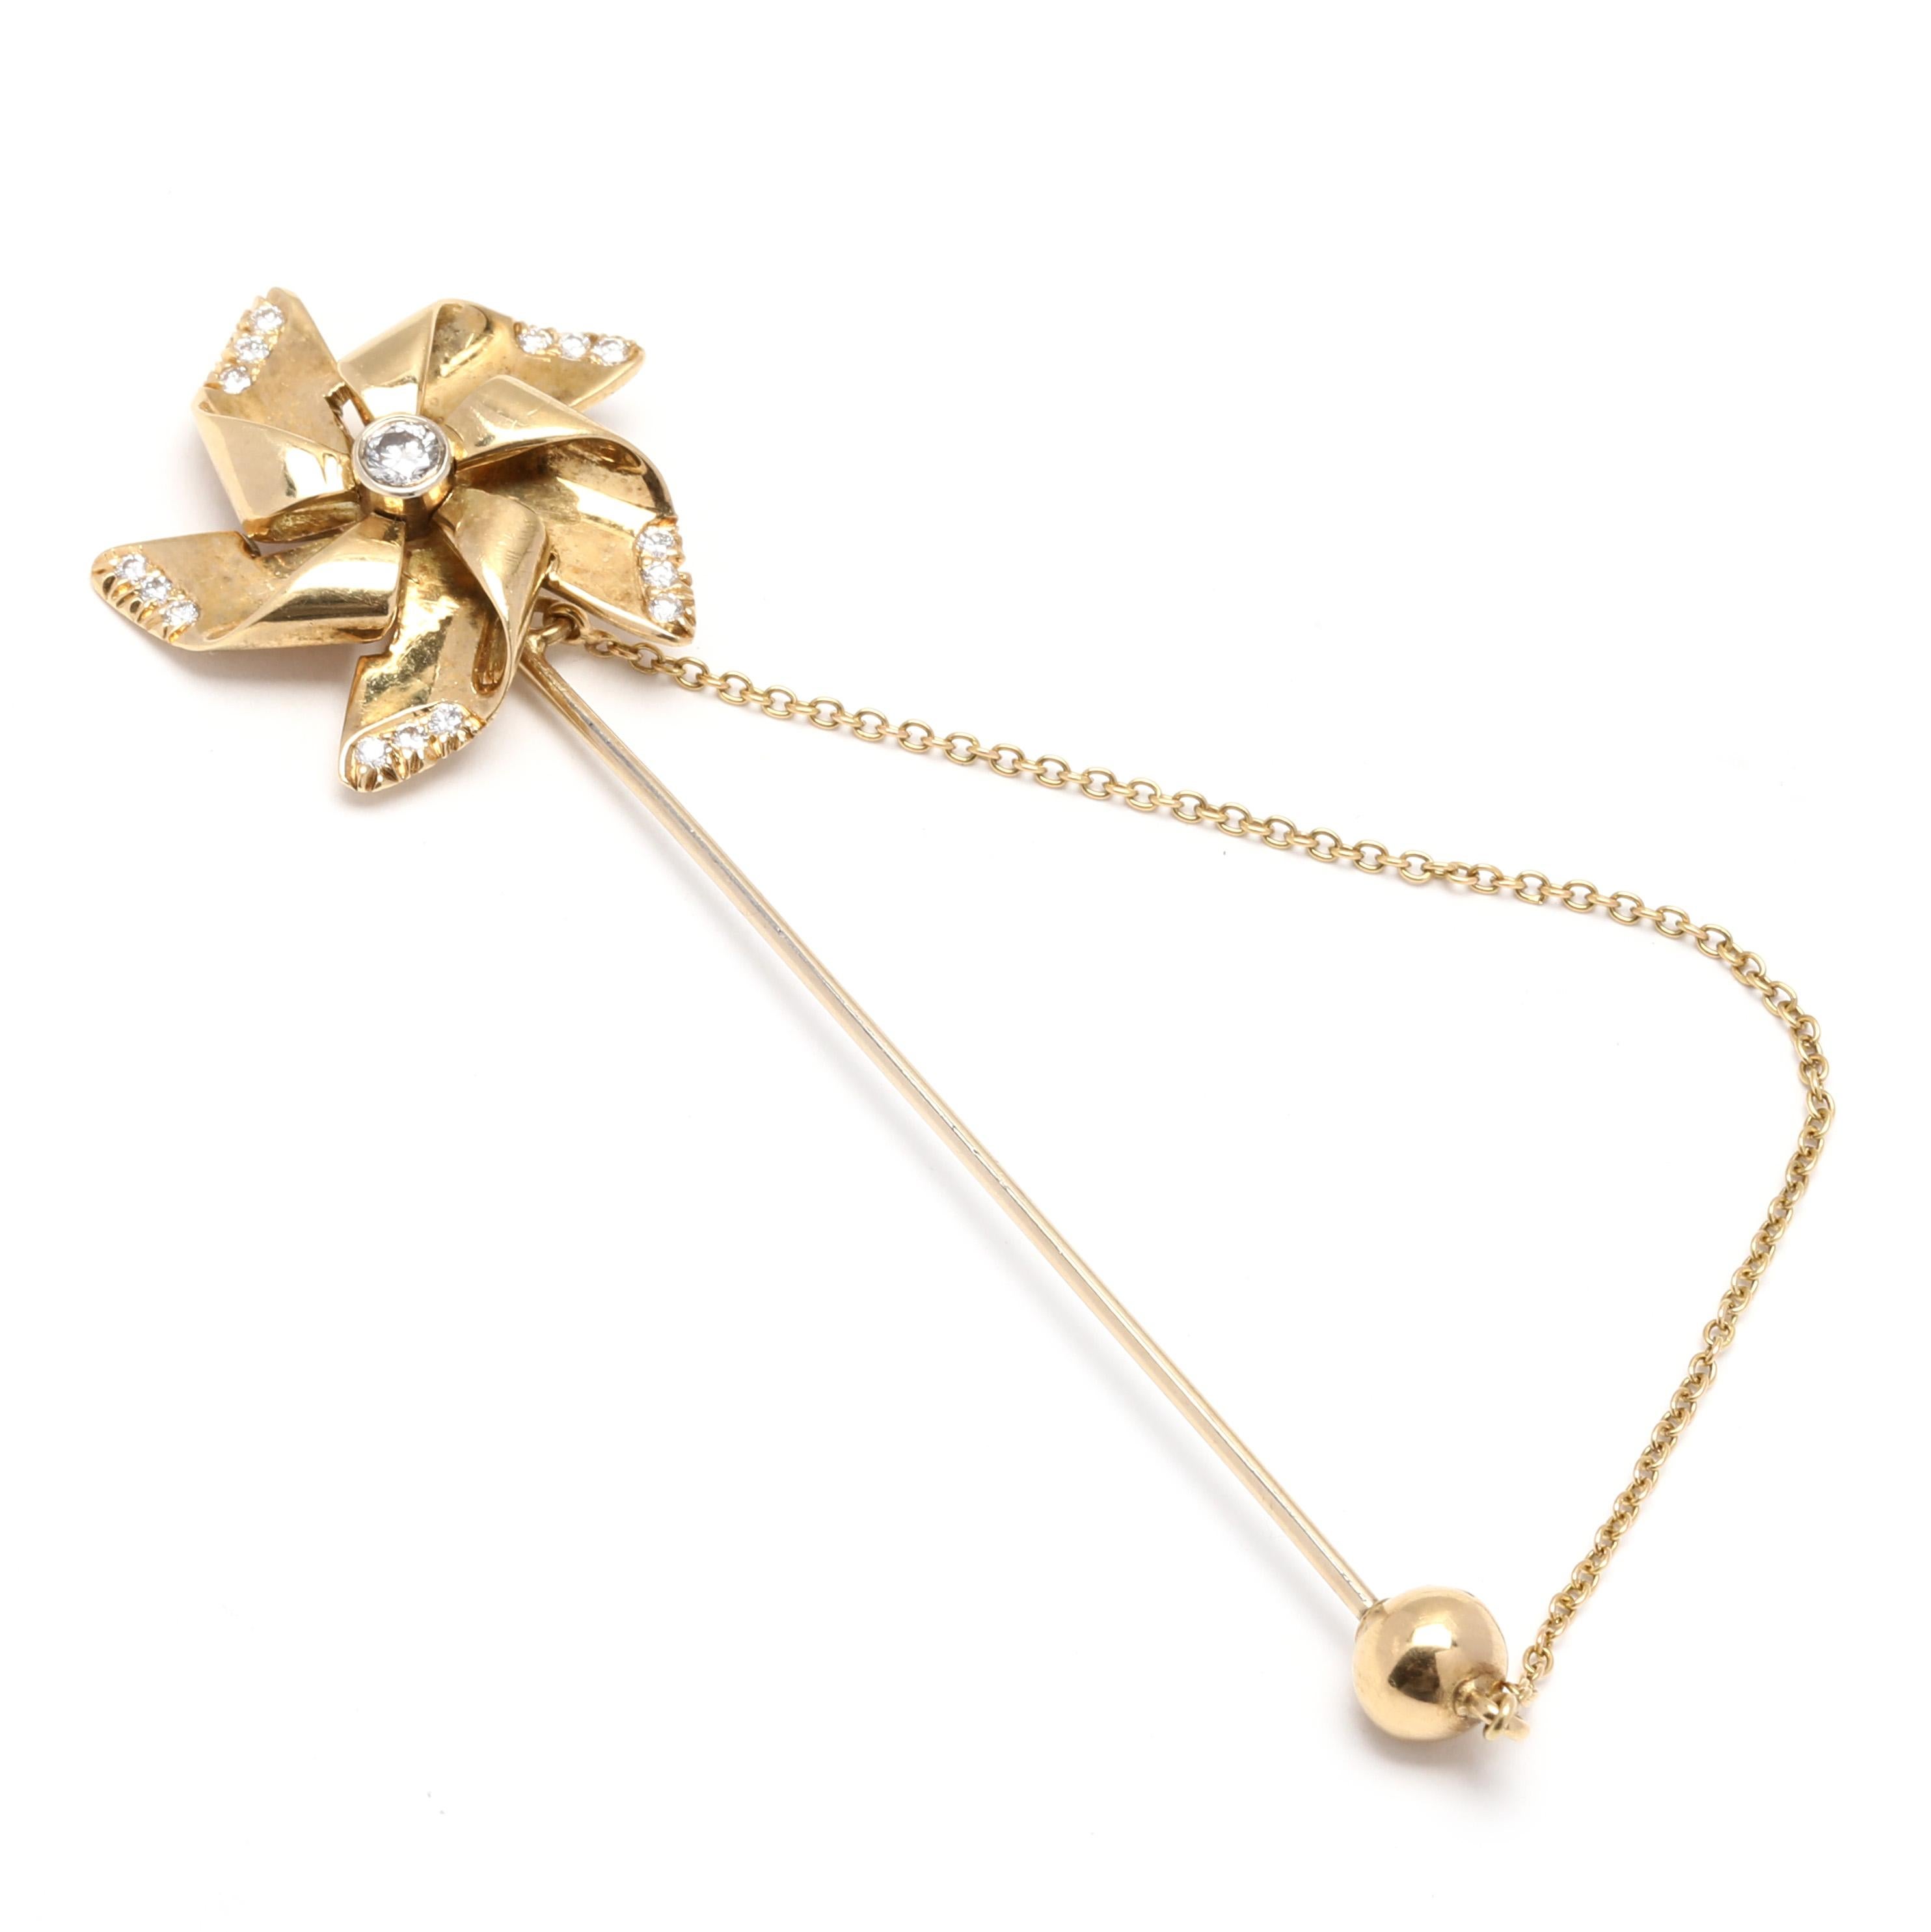 These Italian .33ctw Diamond Pinwheel Jabot Pin is an exquisite piece crafted from 18K yellow gold. The pin features a beautiful pinwheel design with sparkling diamond accents. The diamonds have a total carat weight of .33ctw and add a touch of